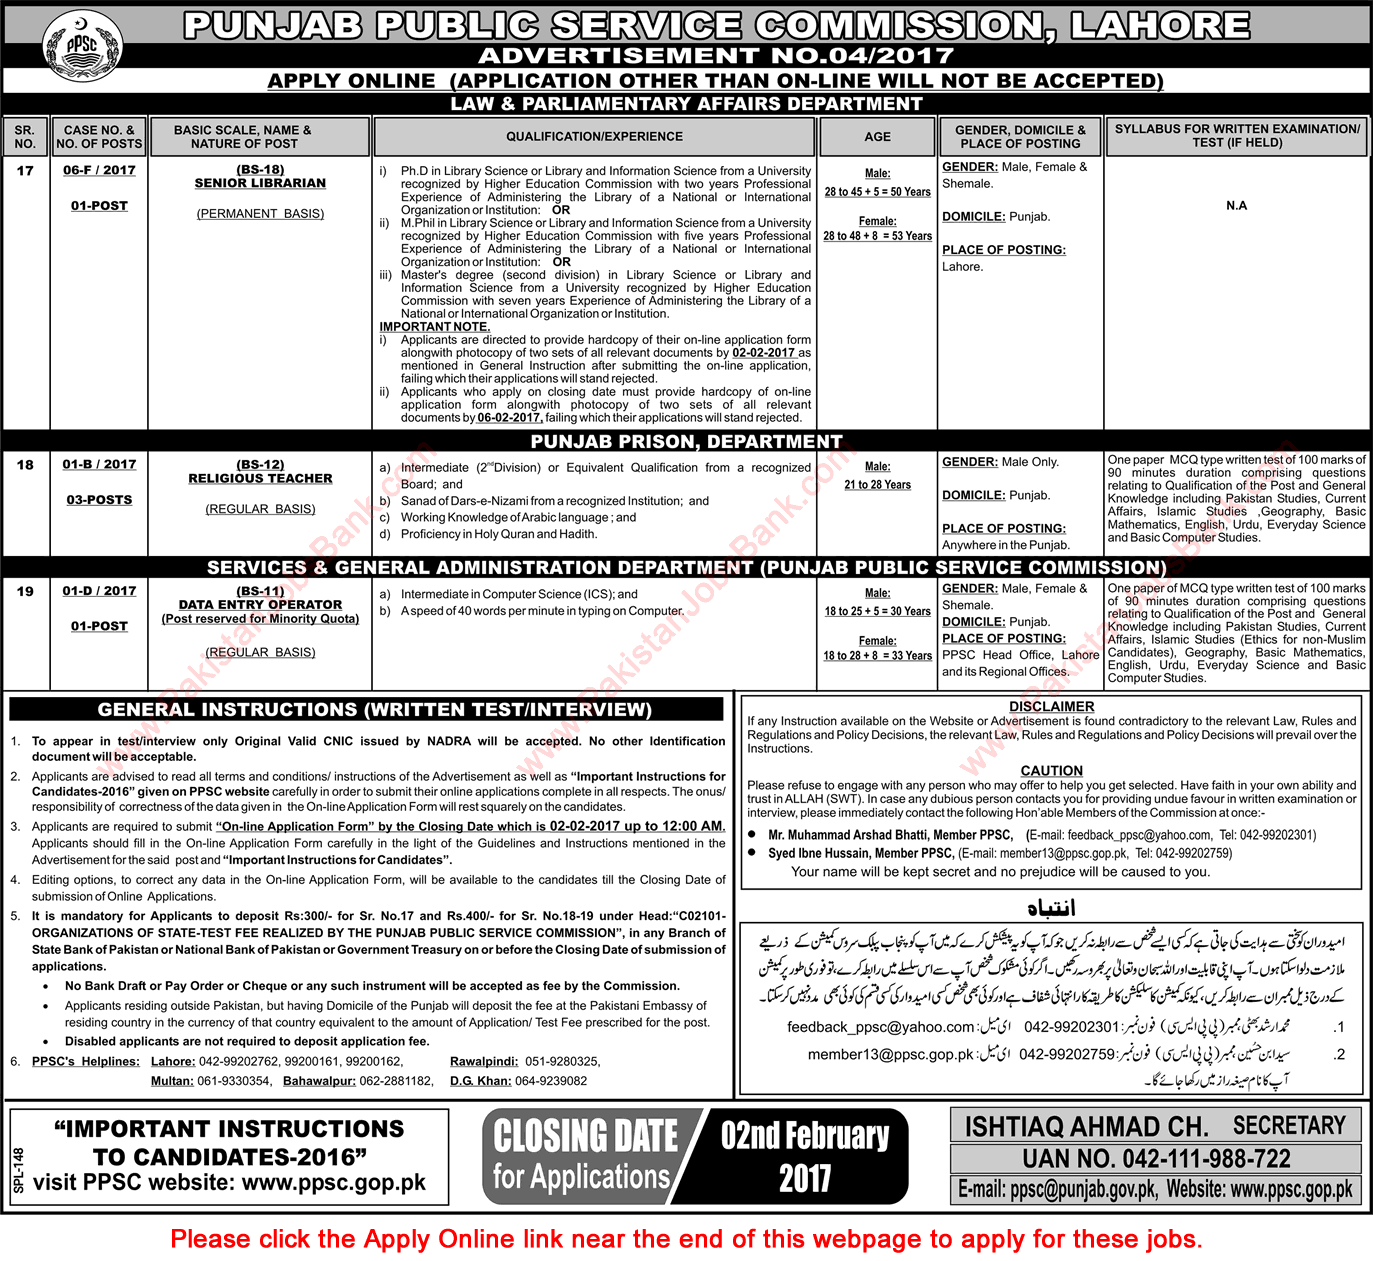 PPSC Jobs 2017 January Consolidated Advertisement 04/2017 4/2017 Apply Online Latest